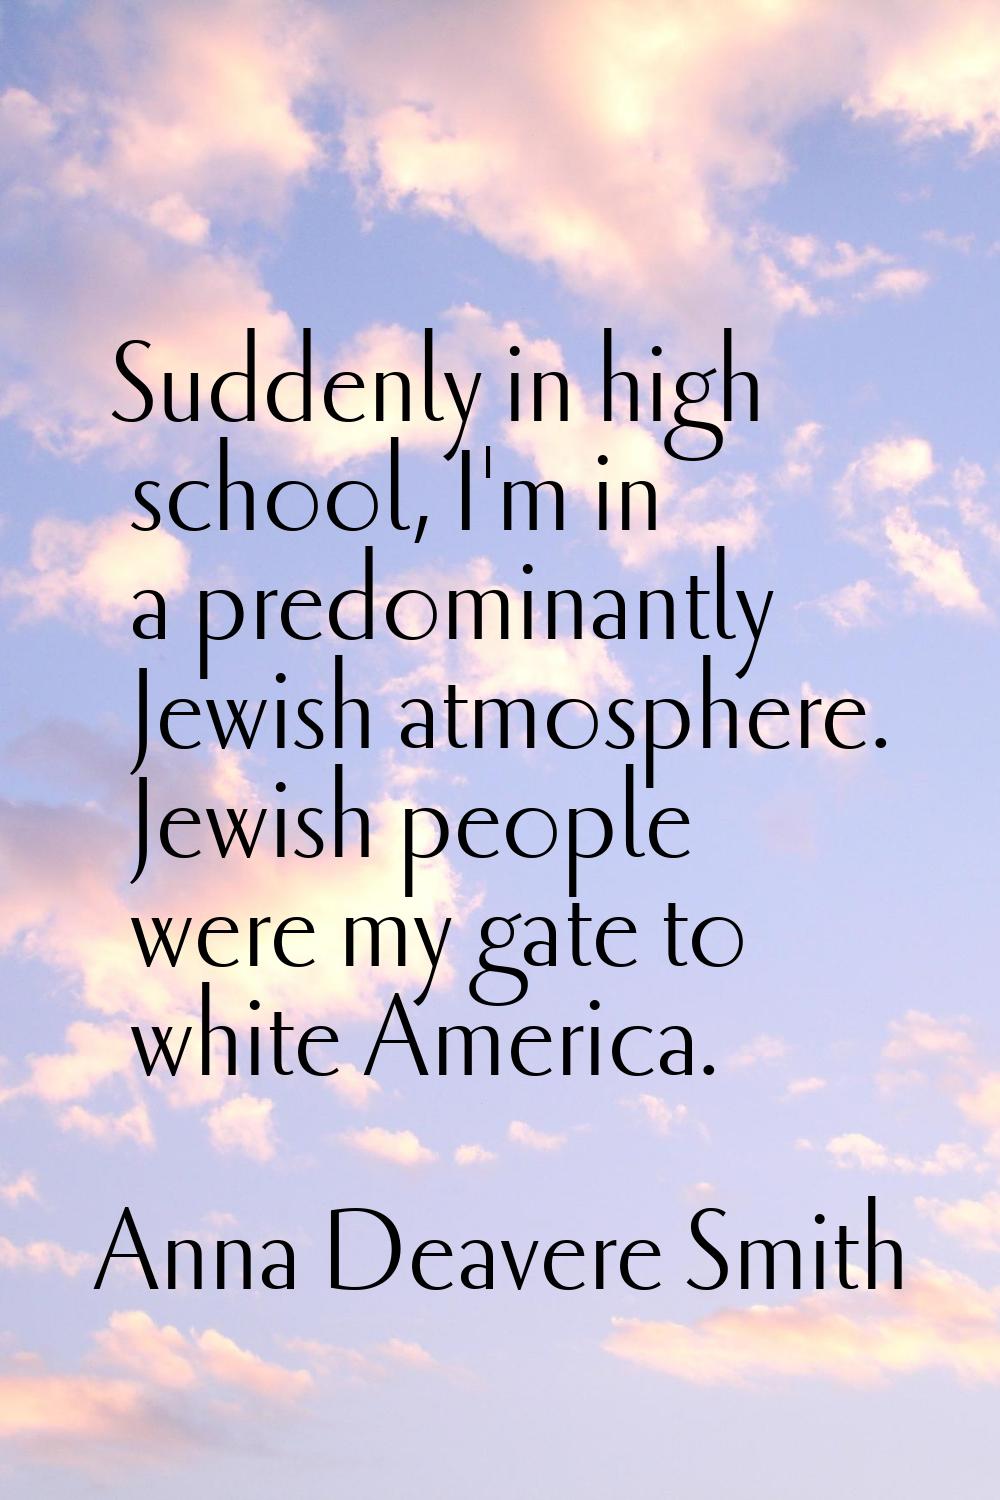 Suddenly in high school, I'm in a predominantly Jewish atmosphere. Jewish people were my gate to wh